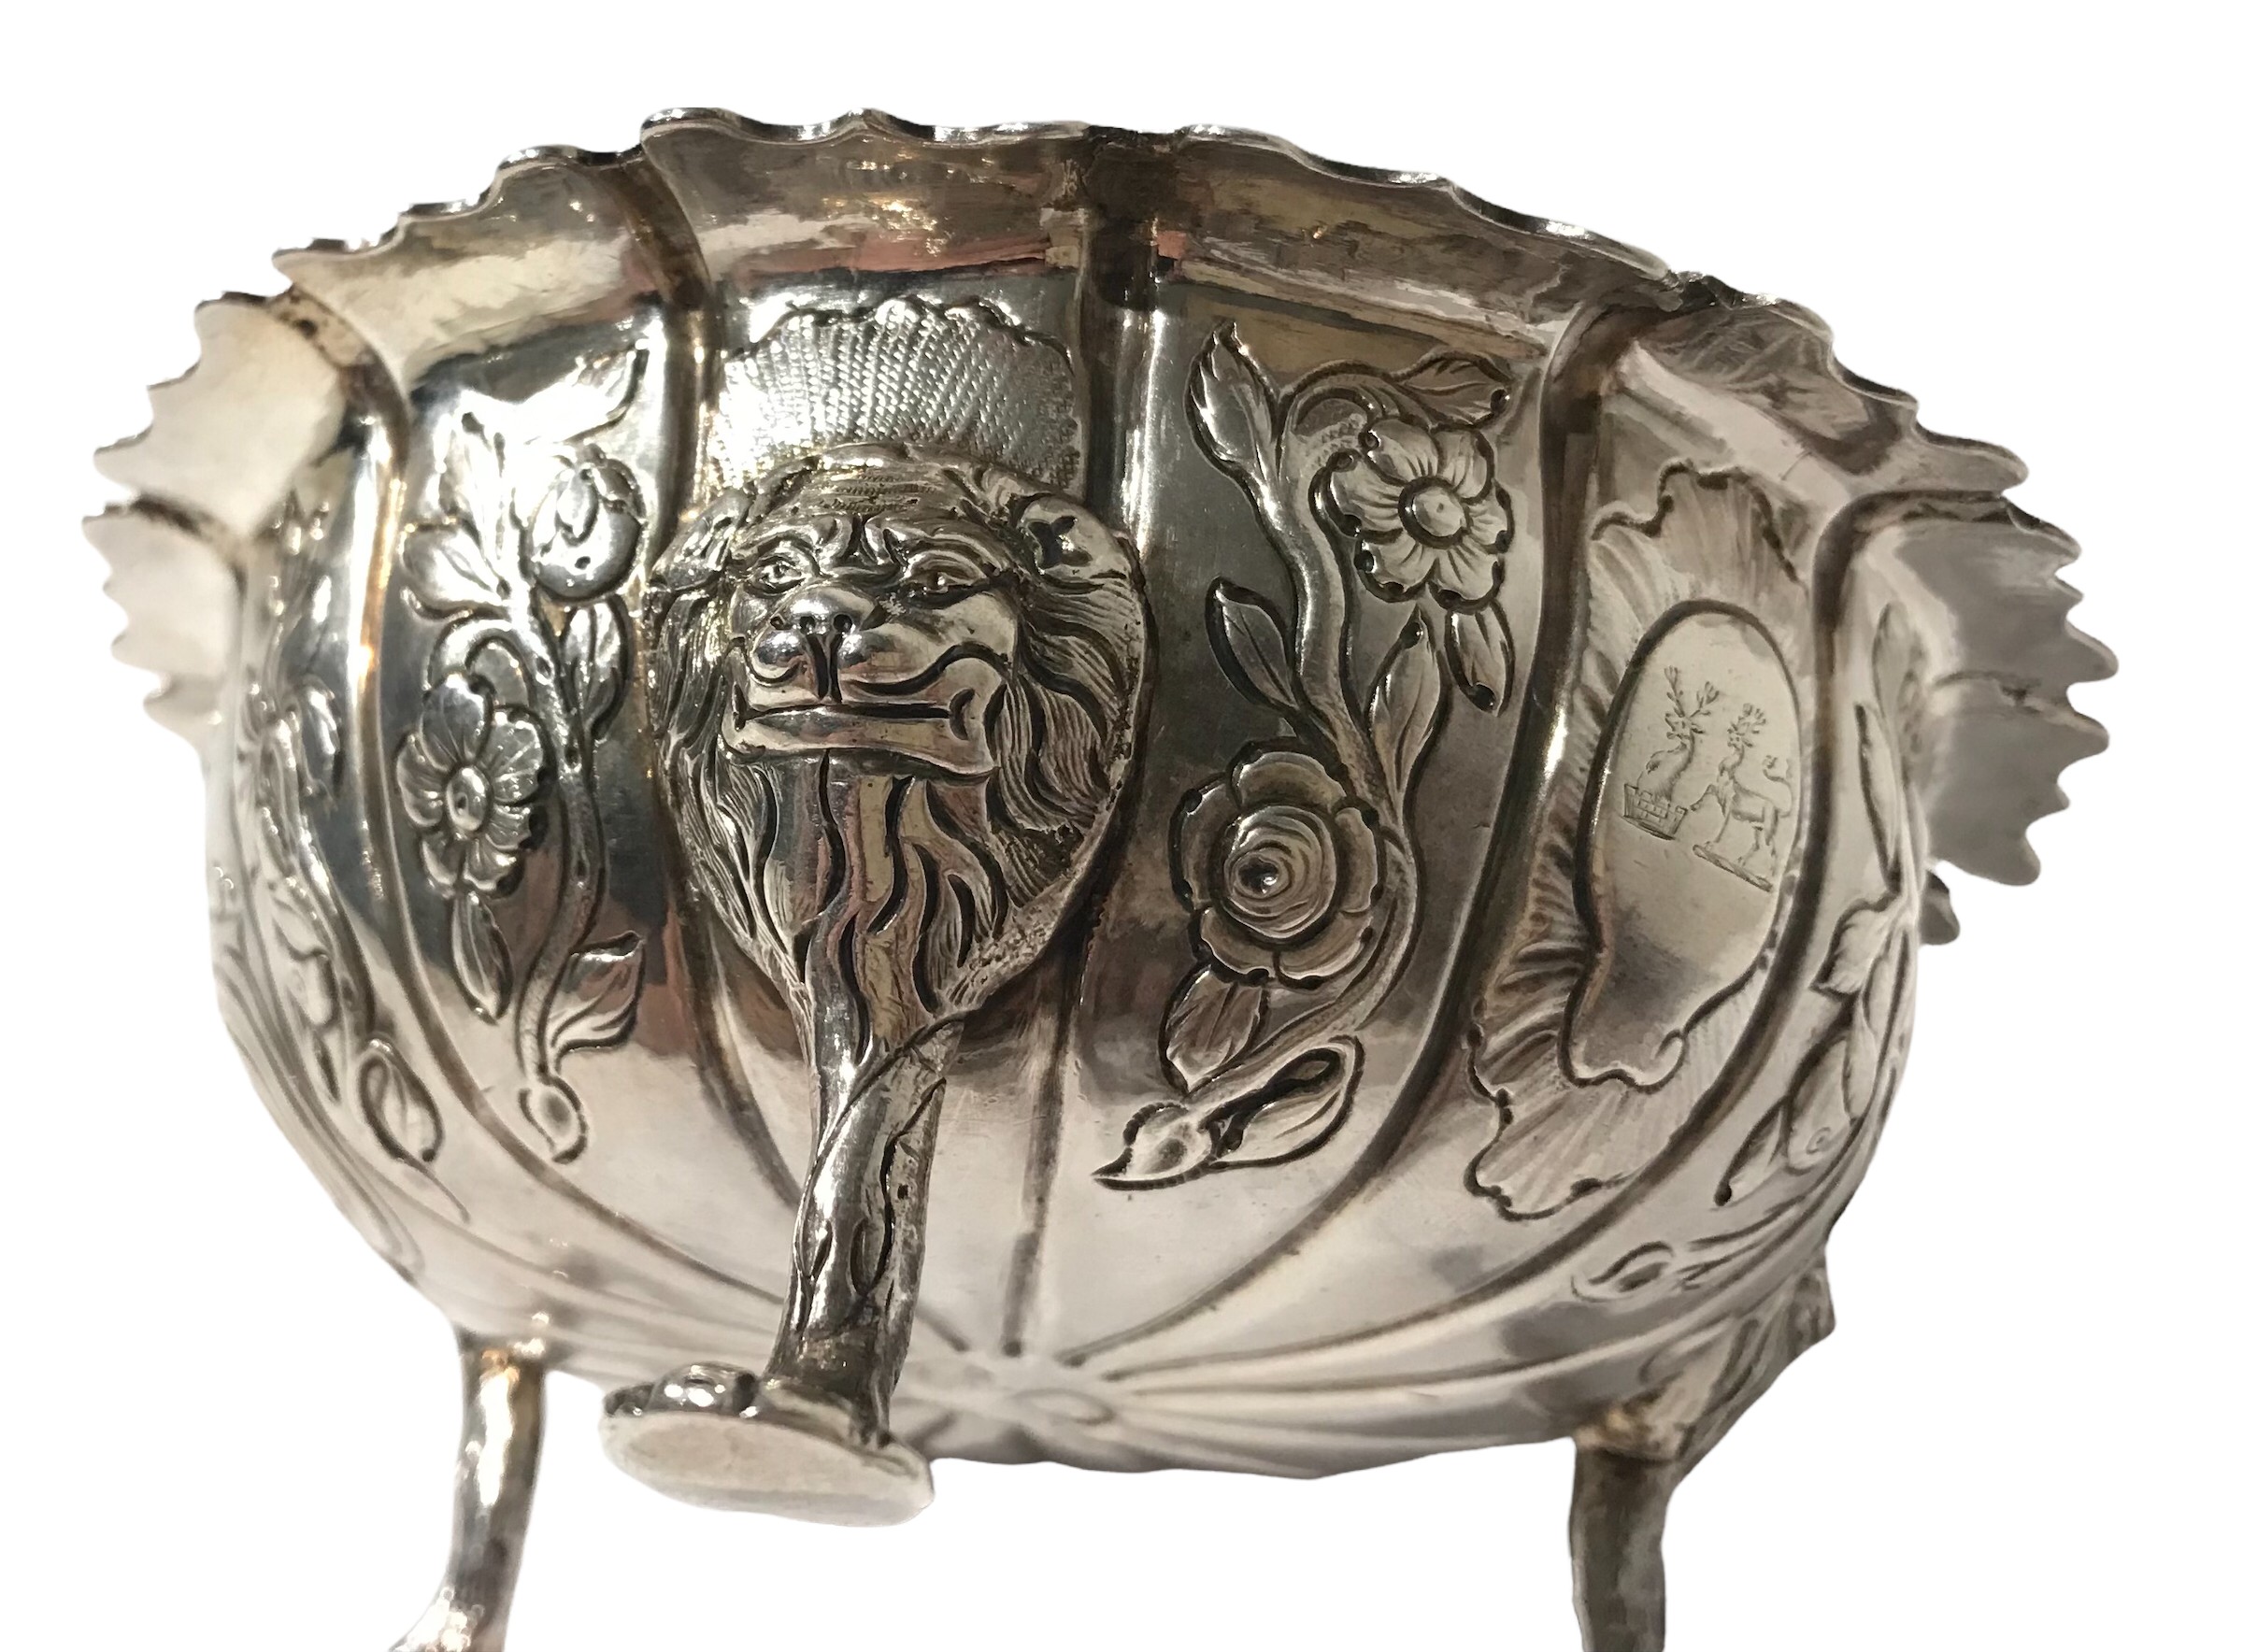 WILLIAM THOMPSON, GEORGE III IRISH SILVER SUGAR BOWL Having decorative incised and repoussé work - Image 4 of 6